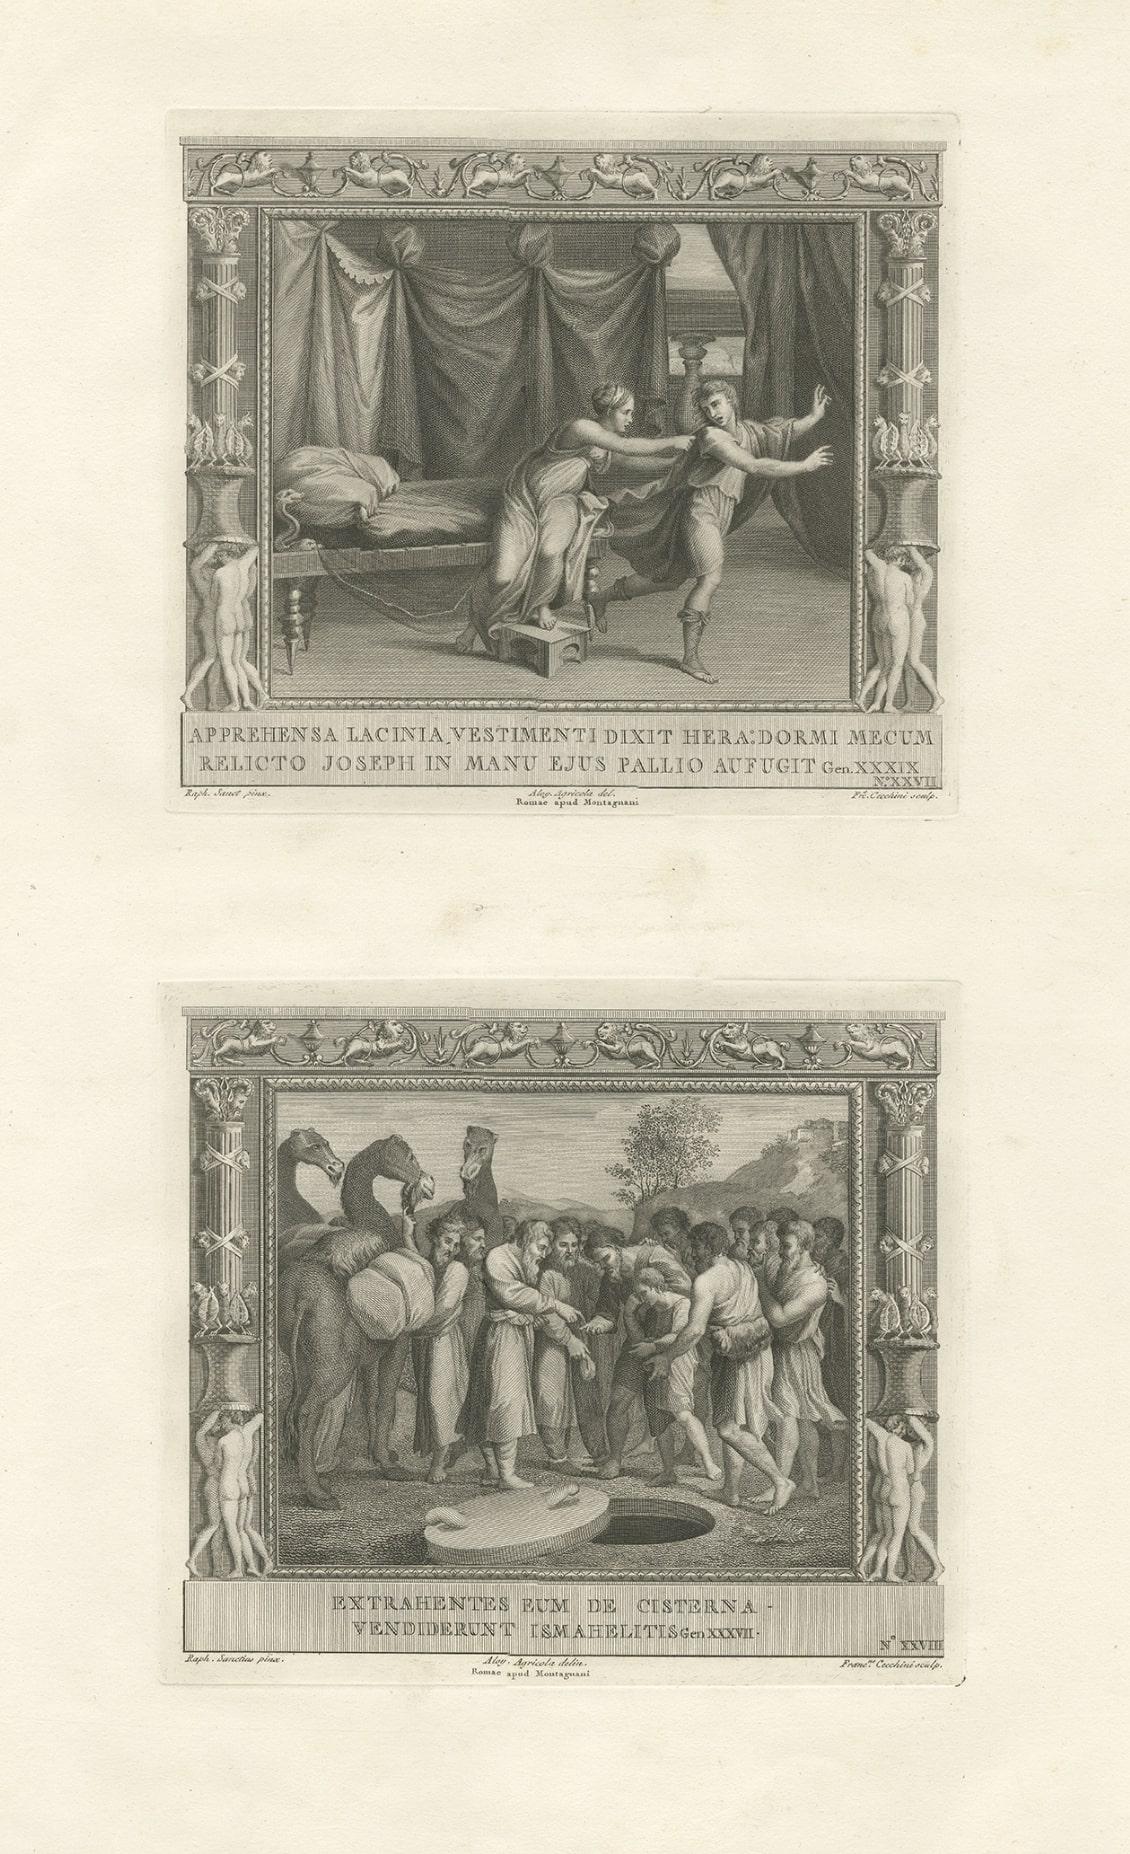 Old Religion Print of Joseph & Potiphar's Wife & Him Being Sold by His Brothers